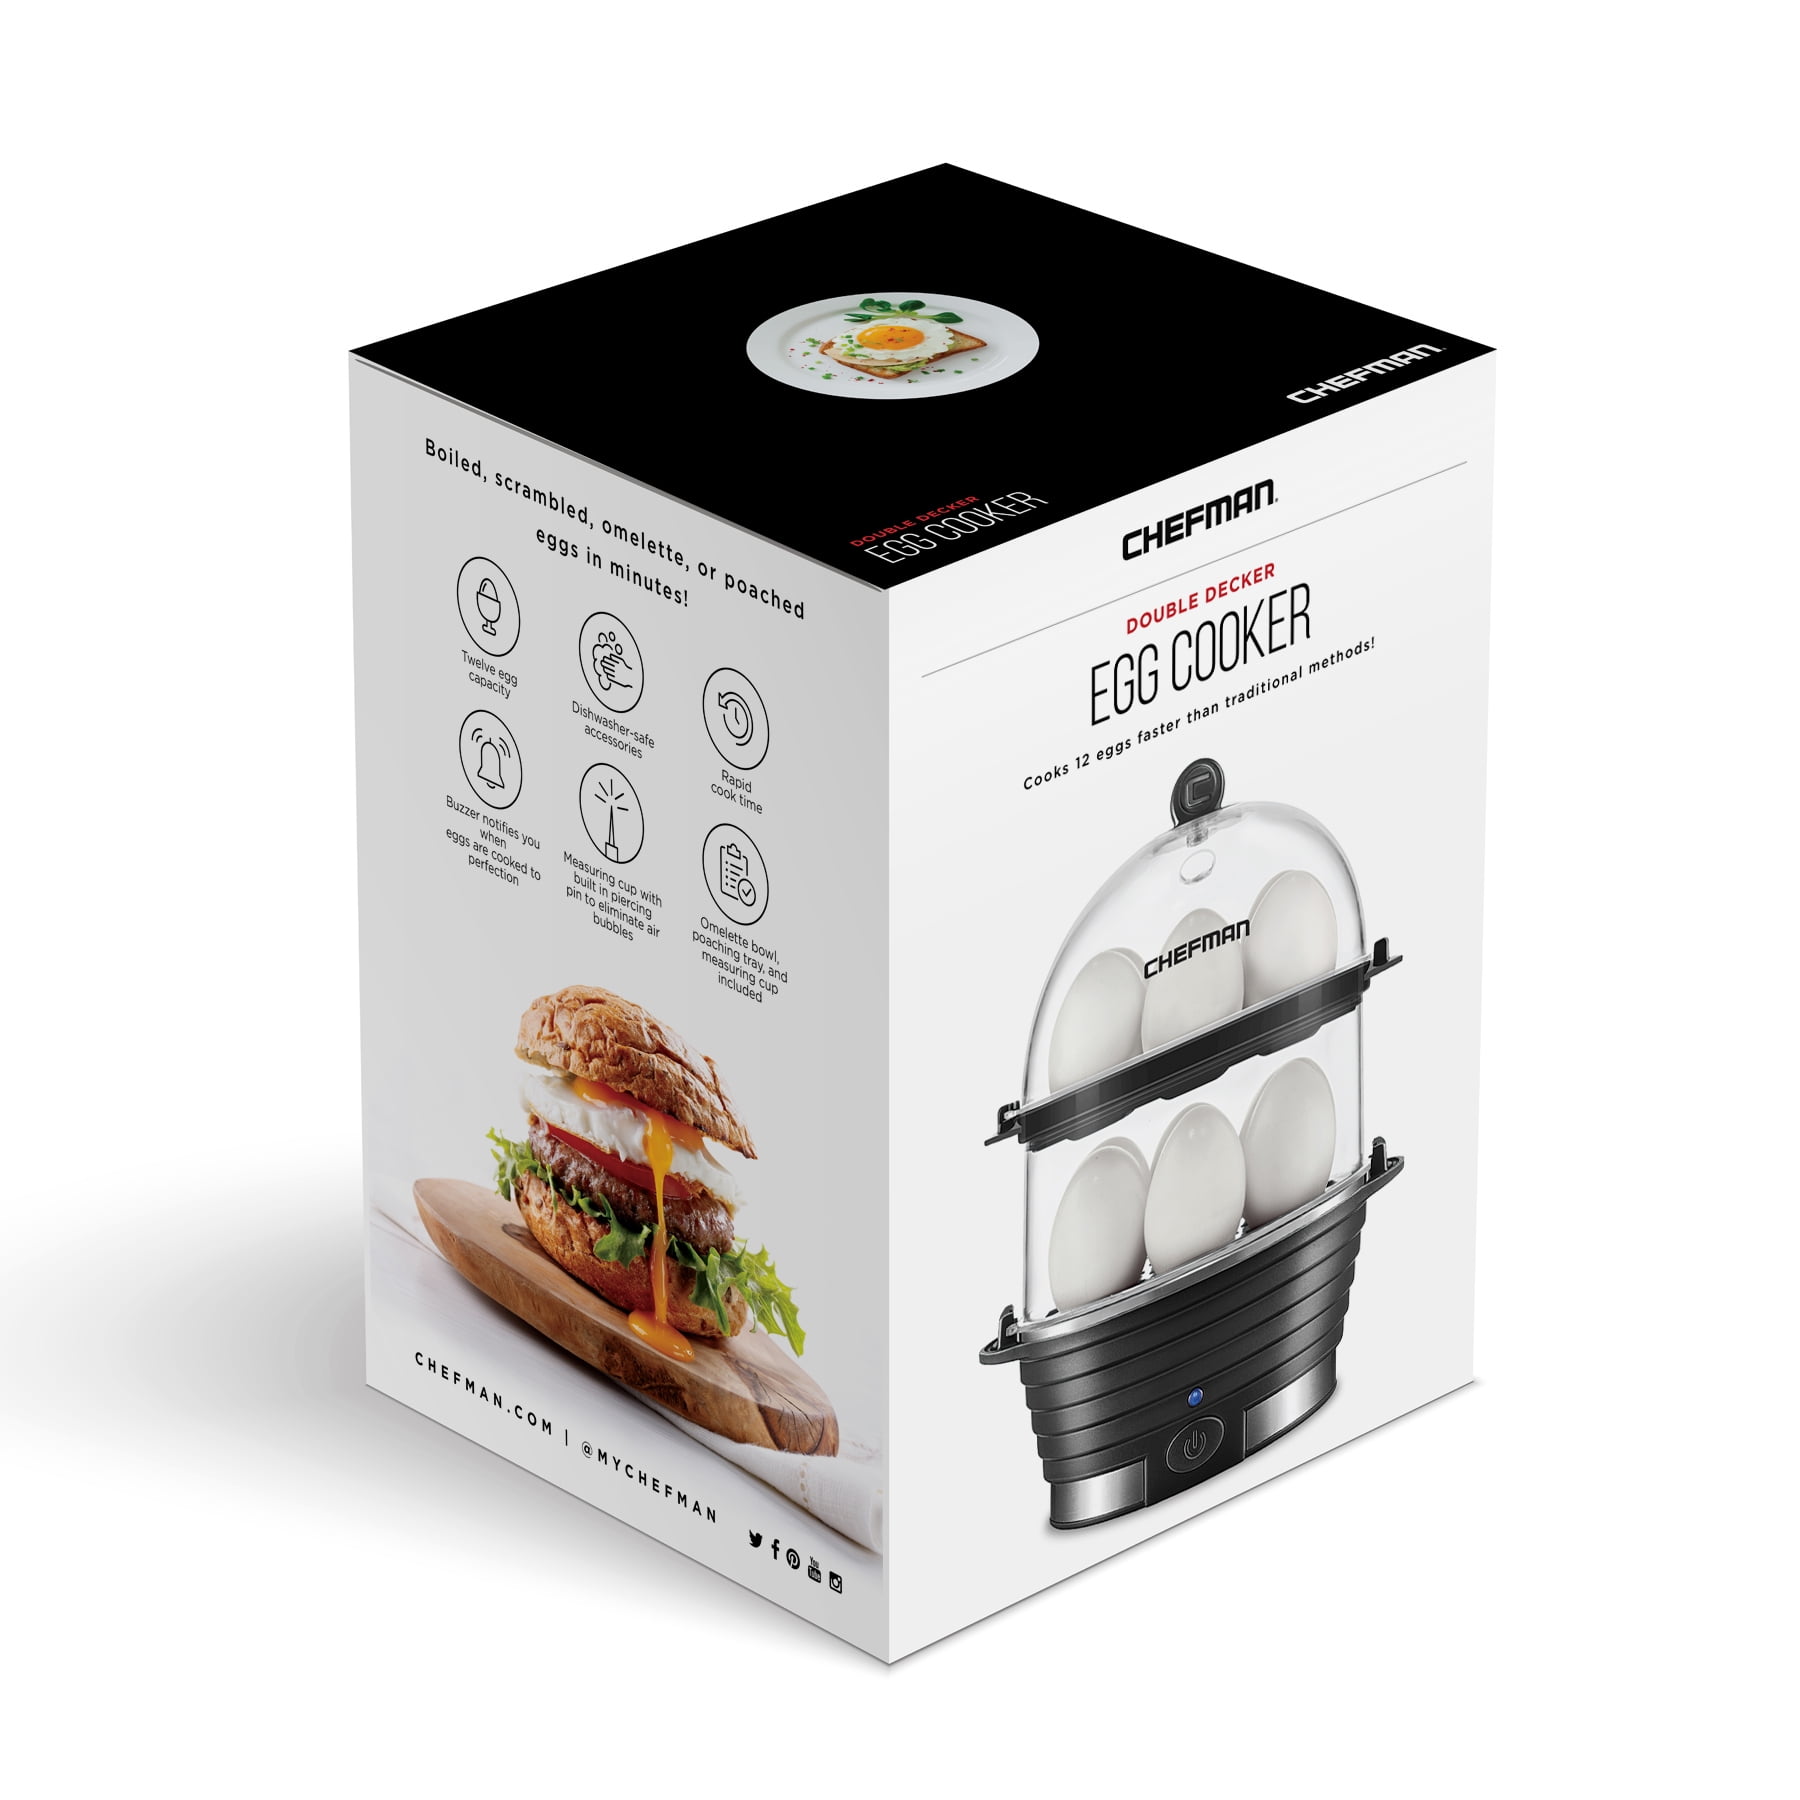 Chefman's 12-egg cooker now one of the most affordable out there at just  $14 (Reg. up to $30)